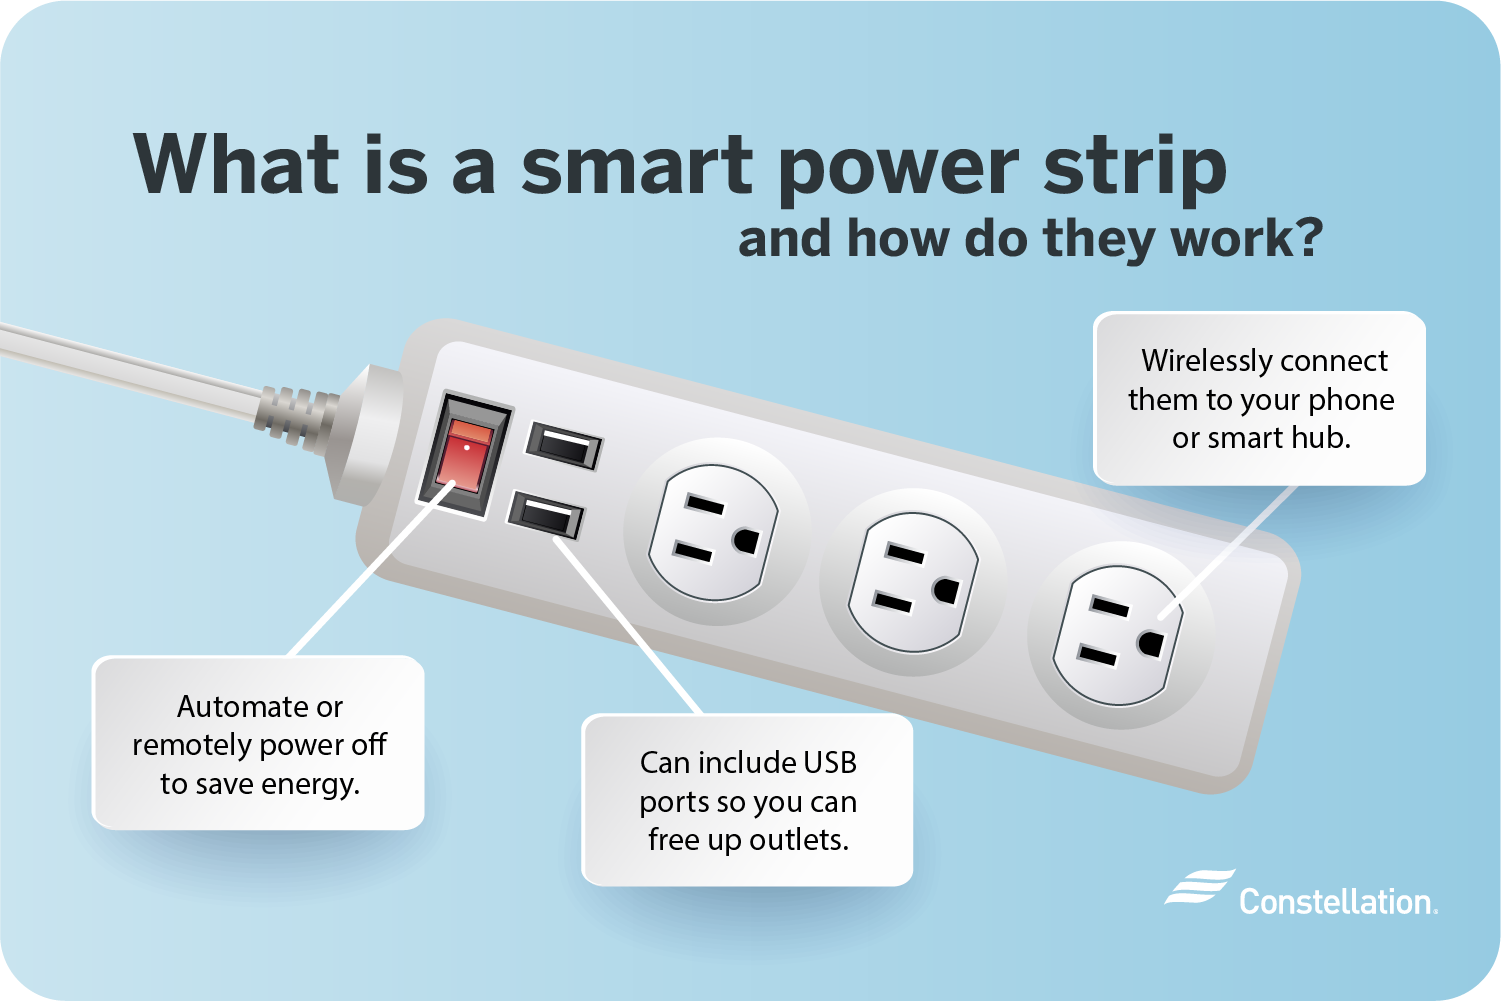 Are smart power strips worth it?